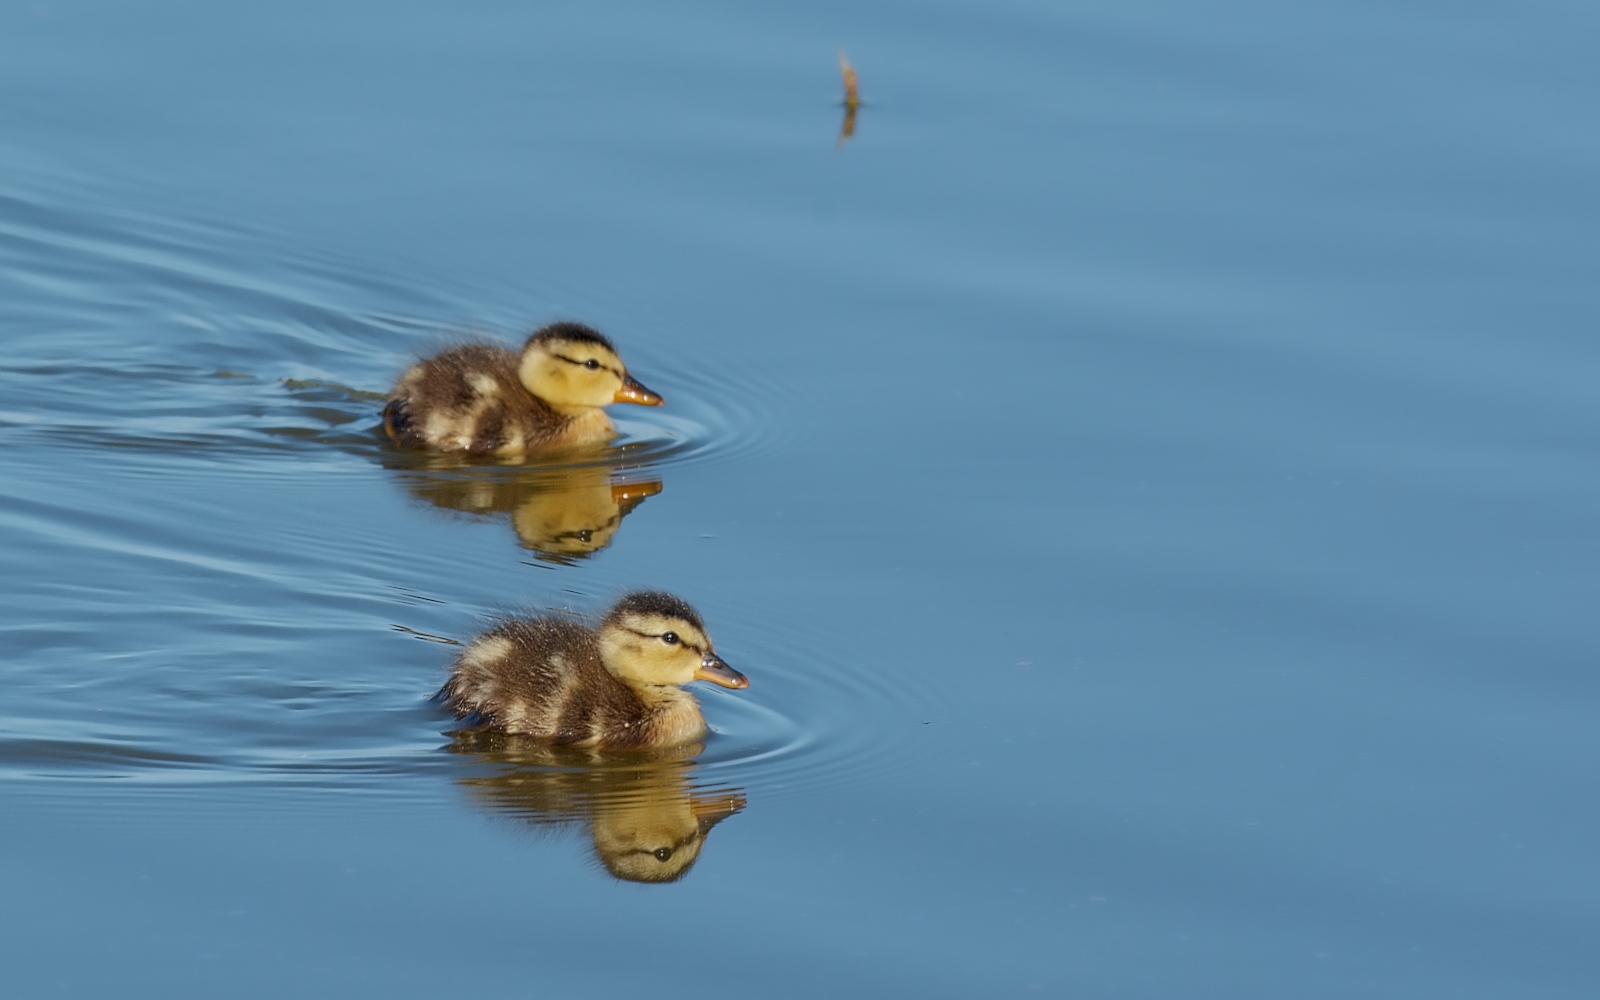 two baby ducks swimming on a body of water